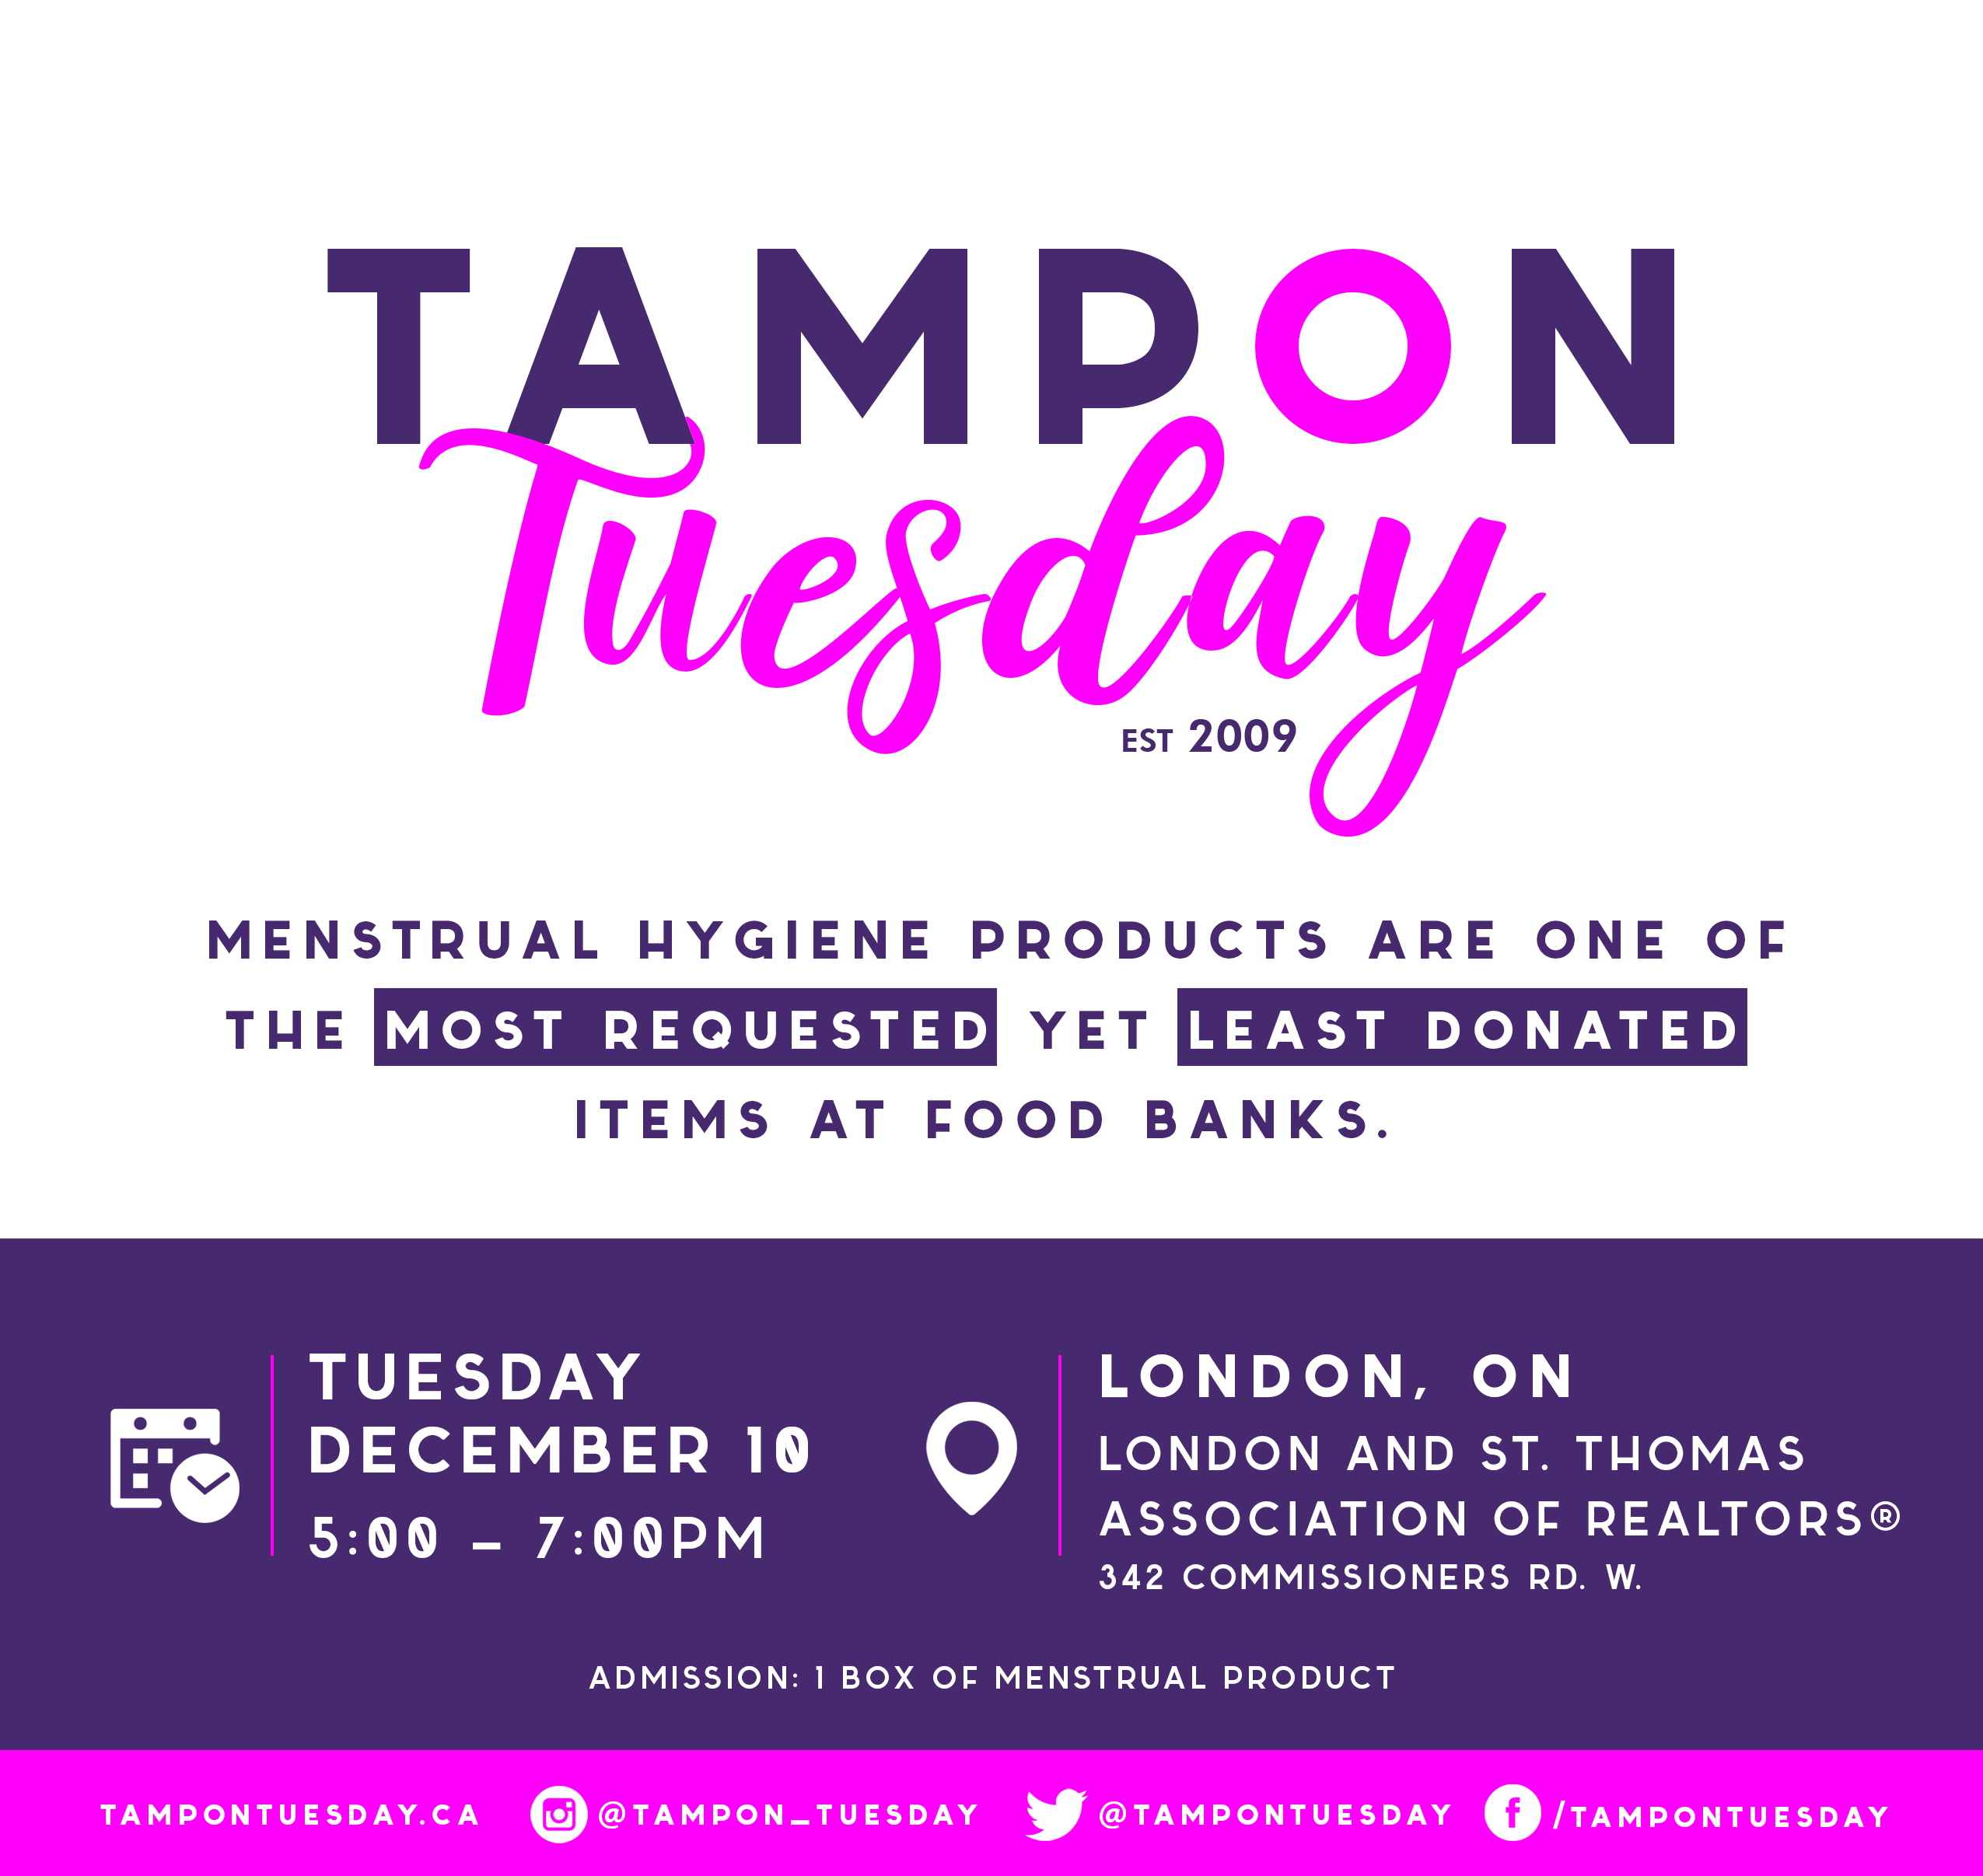 A Tampon Tuesday poster promoting the Tuesday Dec. 10, 2019 event at LStar.